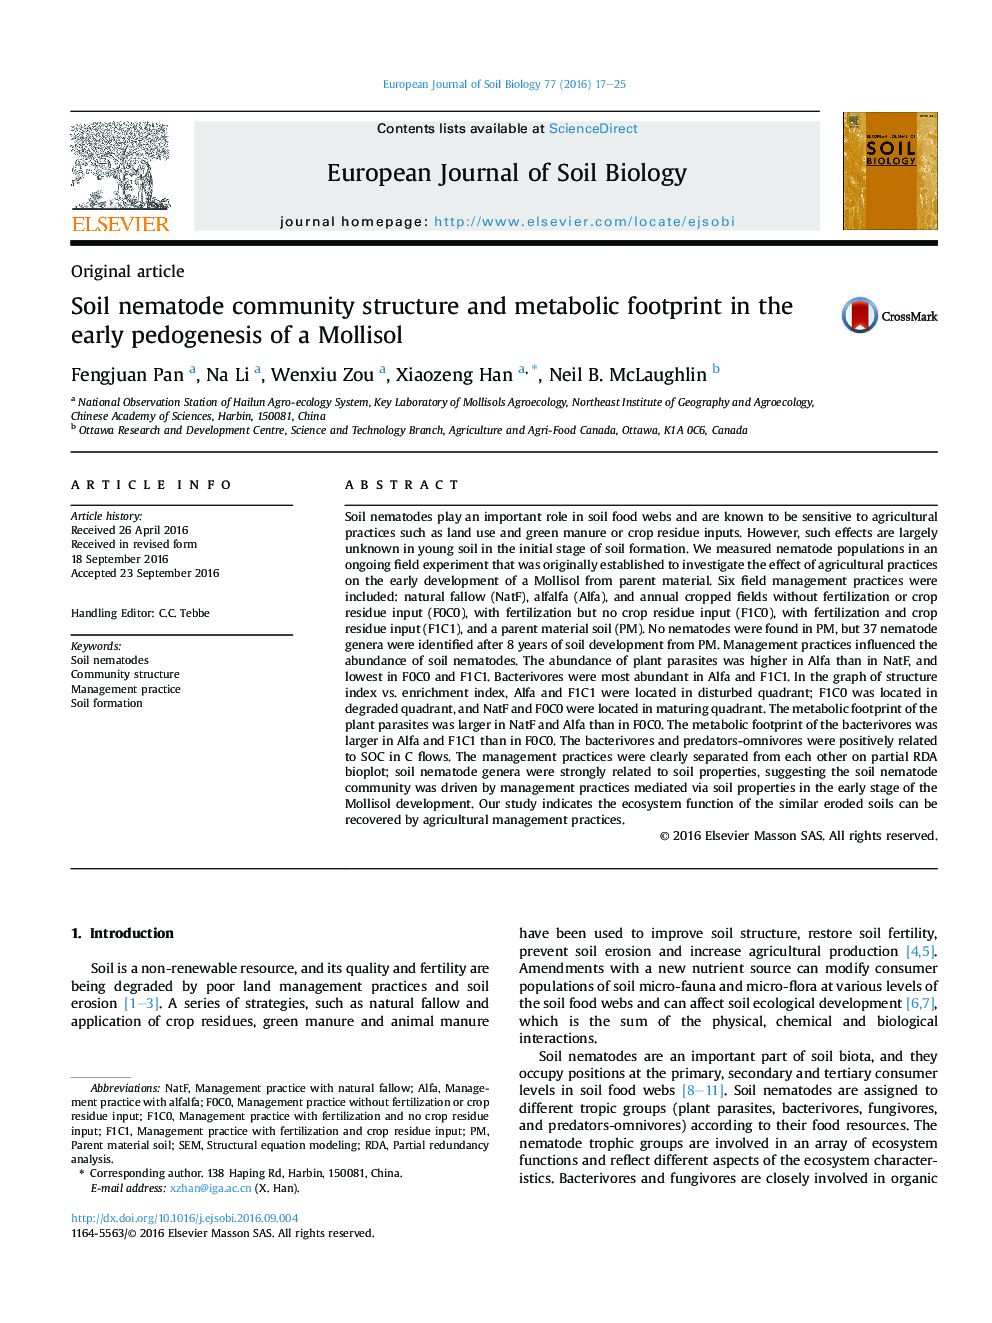 Soil nematode community structure and metabolic footprint in the early pedogenesis of a Mollisol